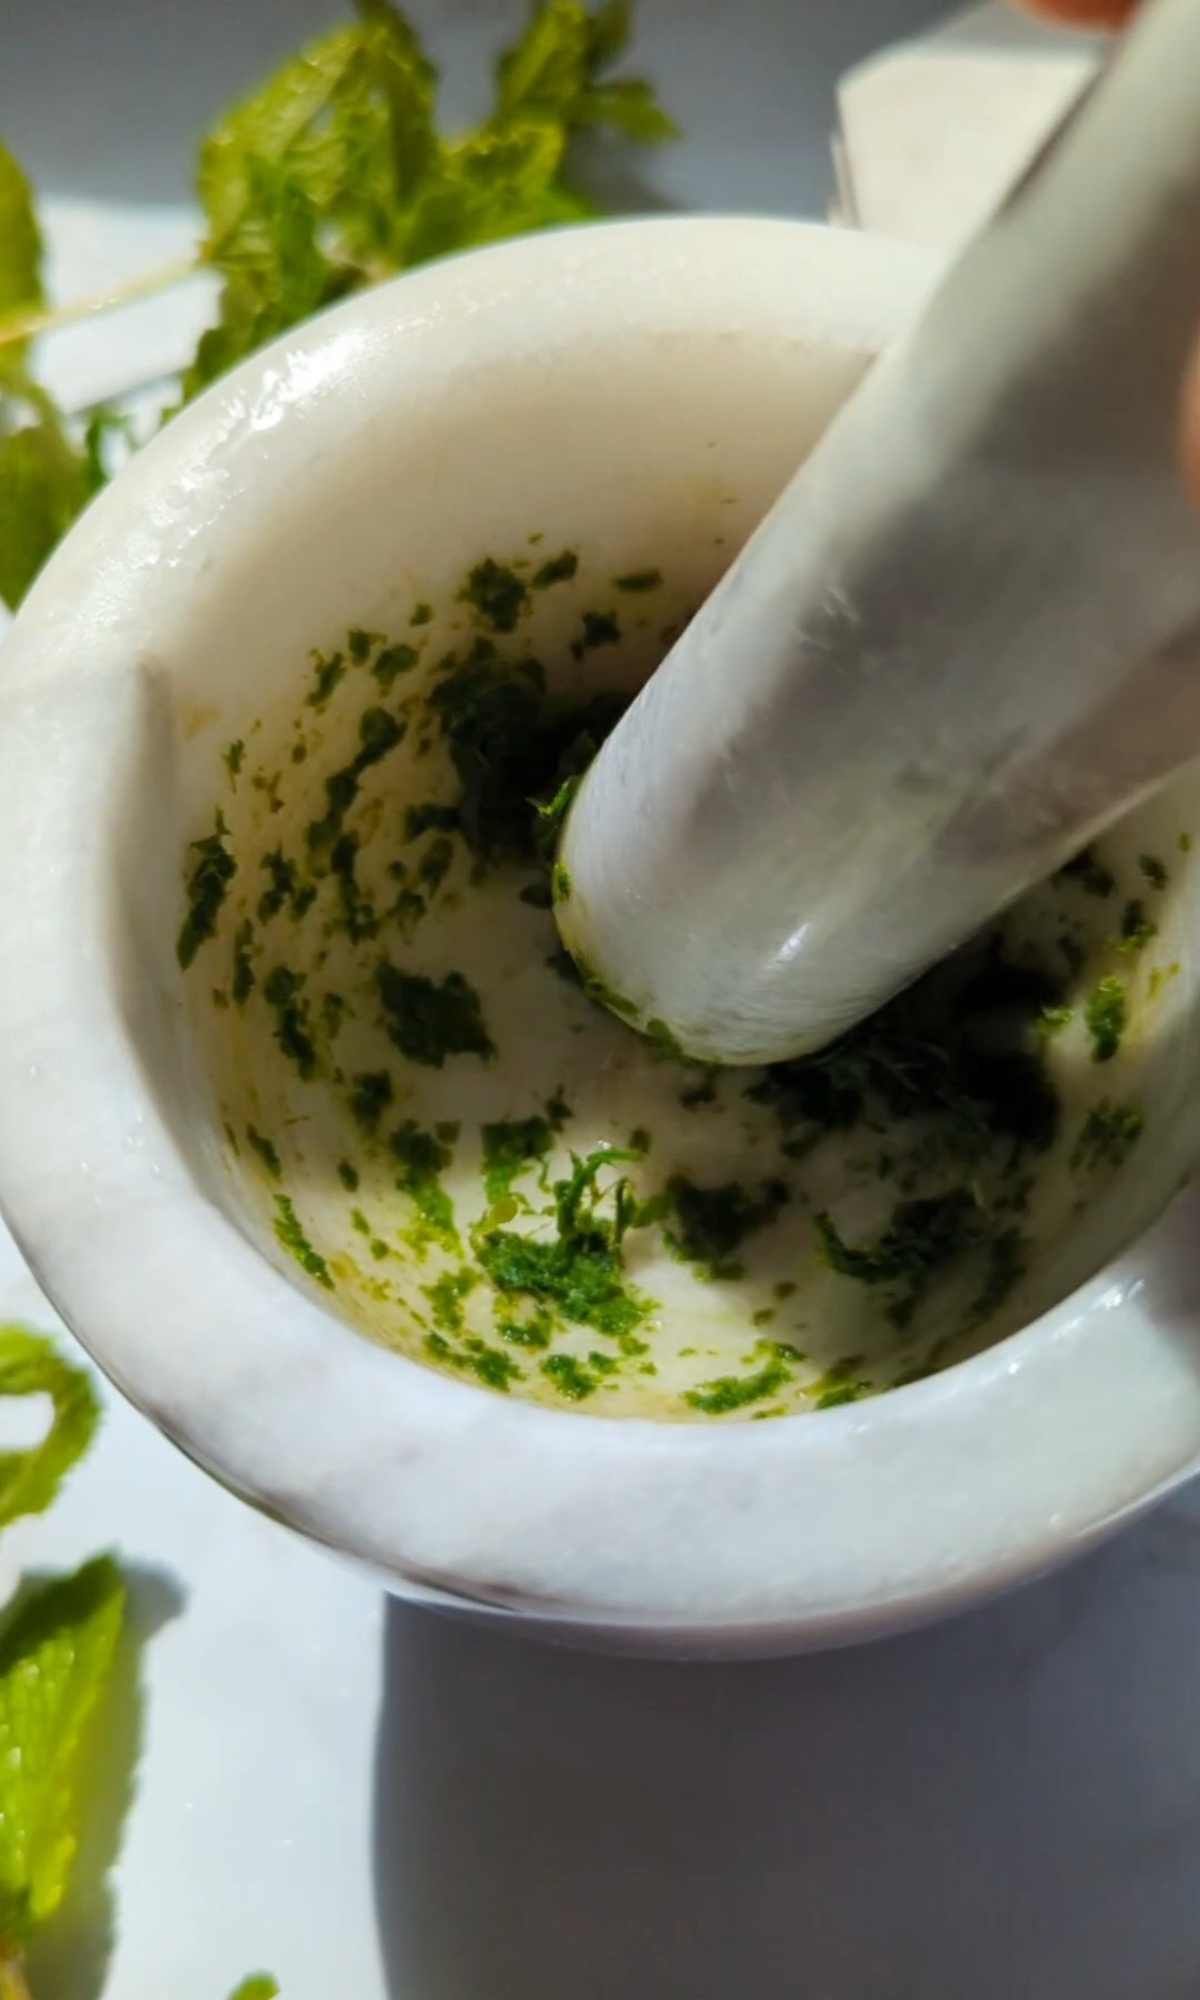 fresh mint leaves being muddled in a mortar and pestle to make lemonade.